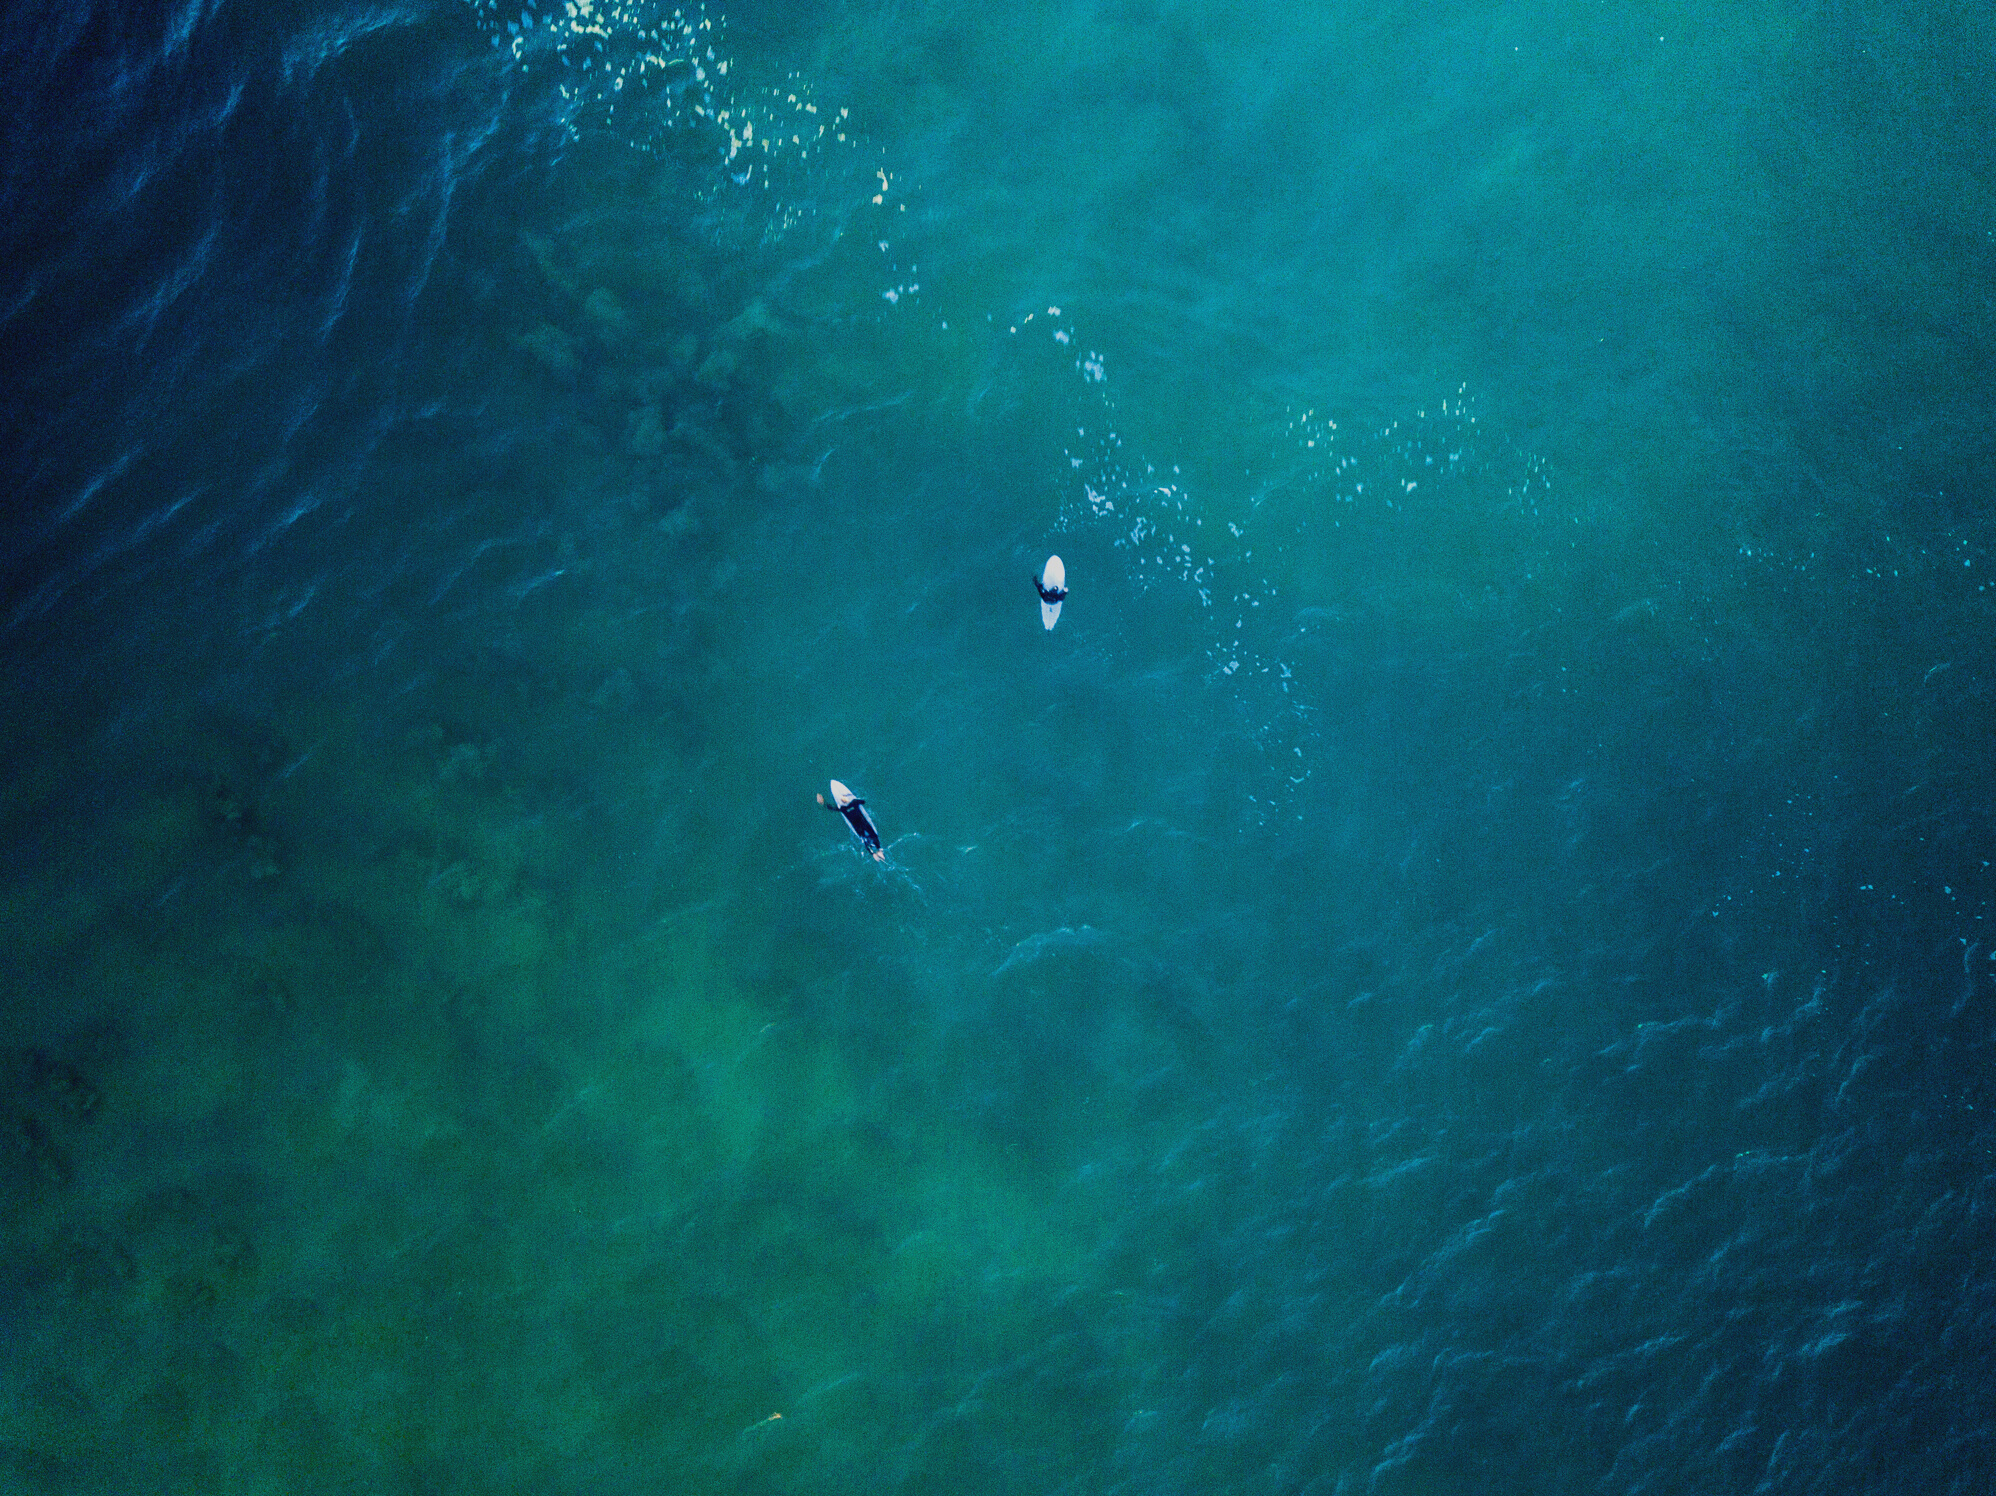 Two Surfers in the Middle of the Ocean